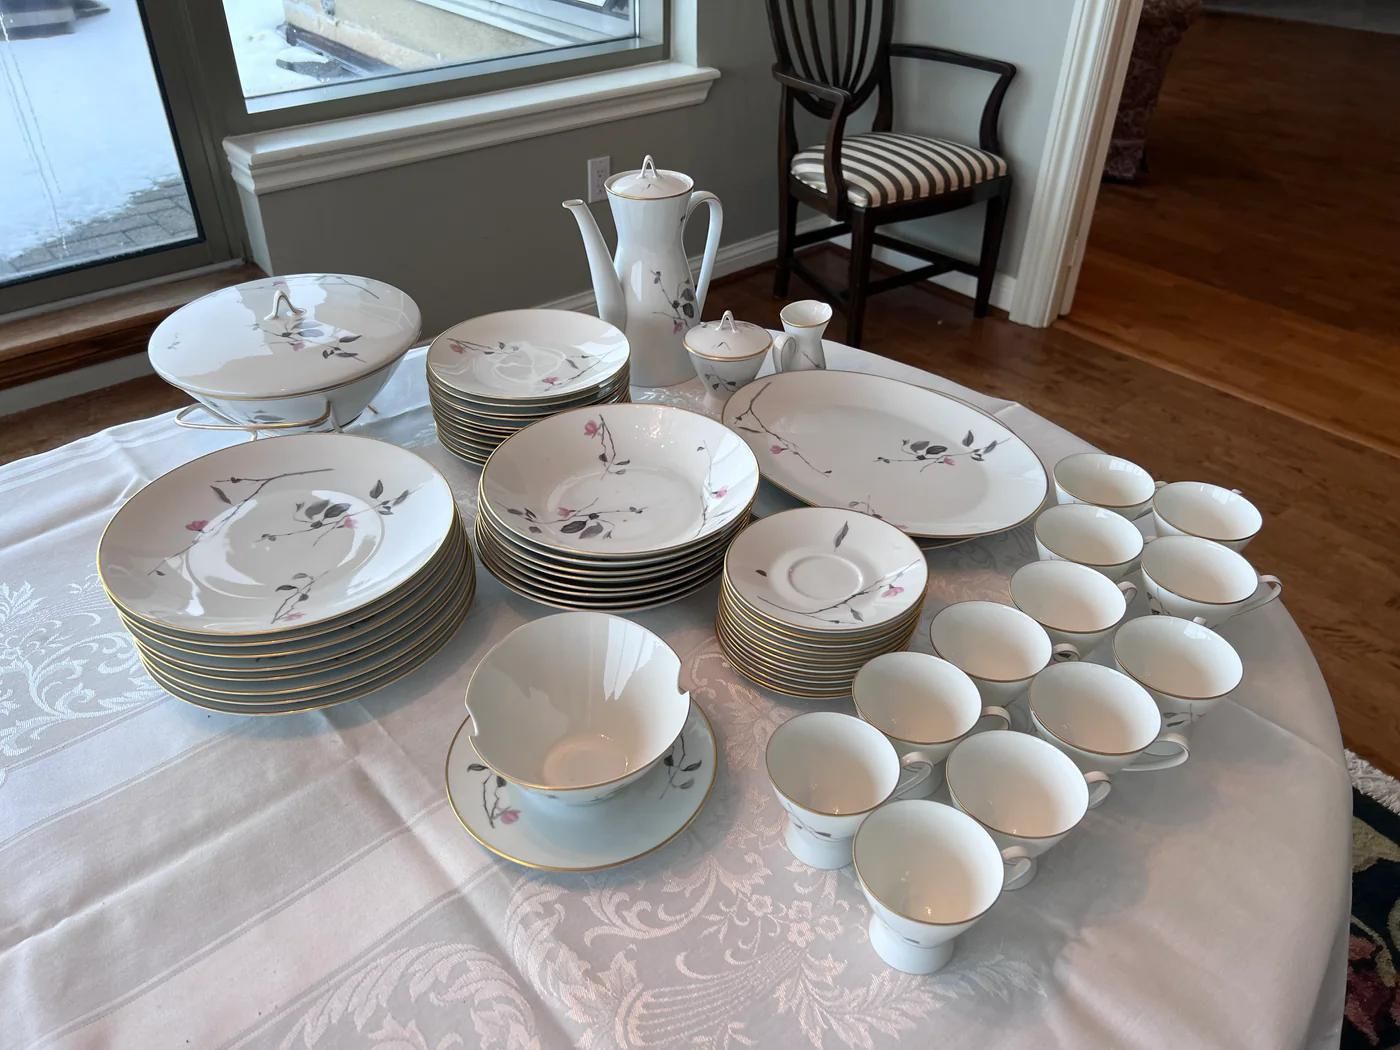 How Can I Replace A Broken Rosenthal China Dessert Plate By Raymond Loewy?